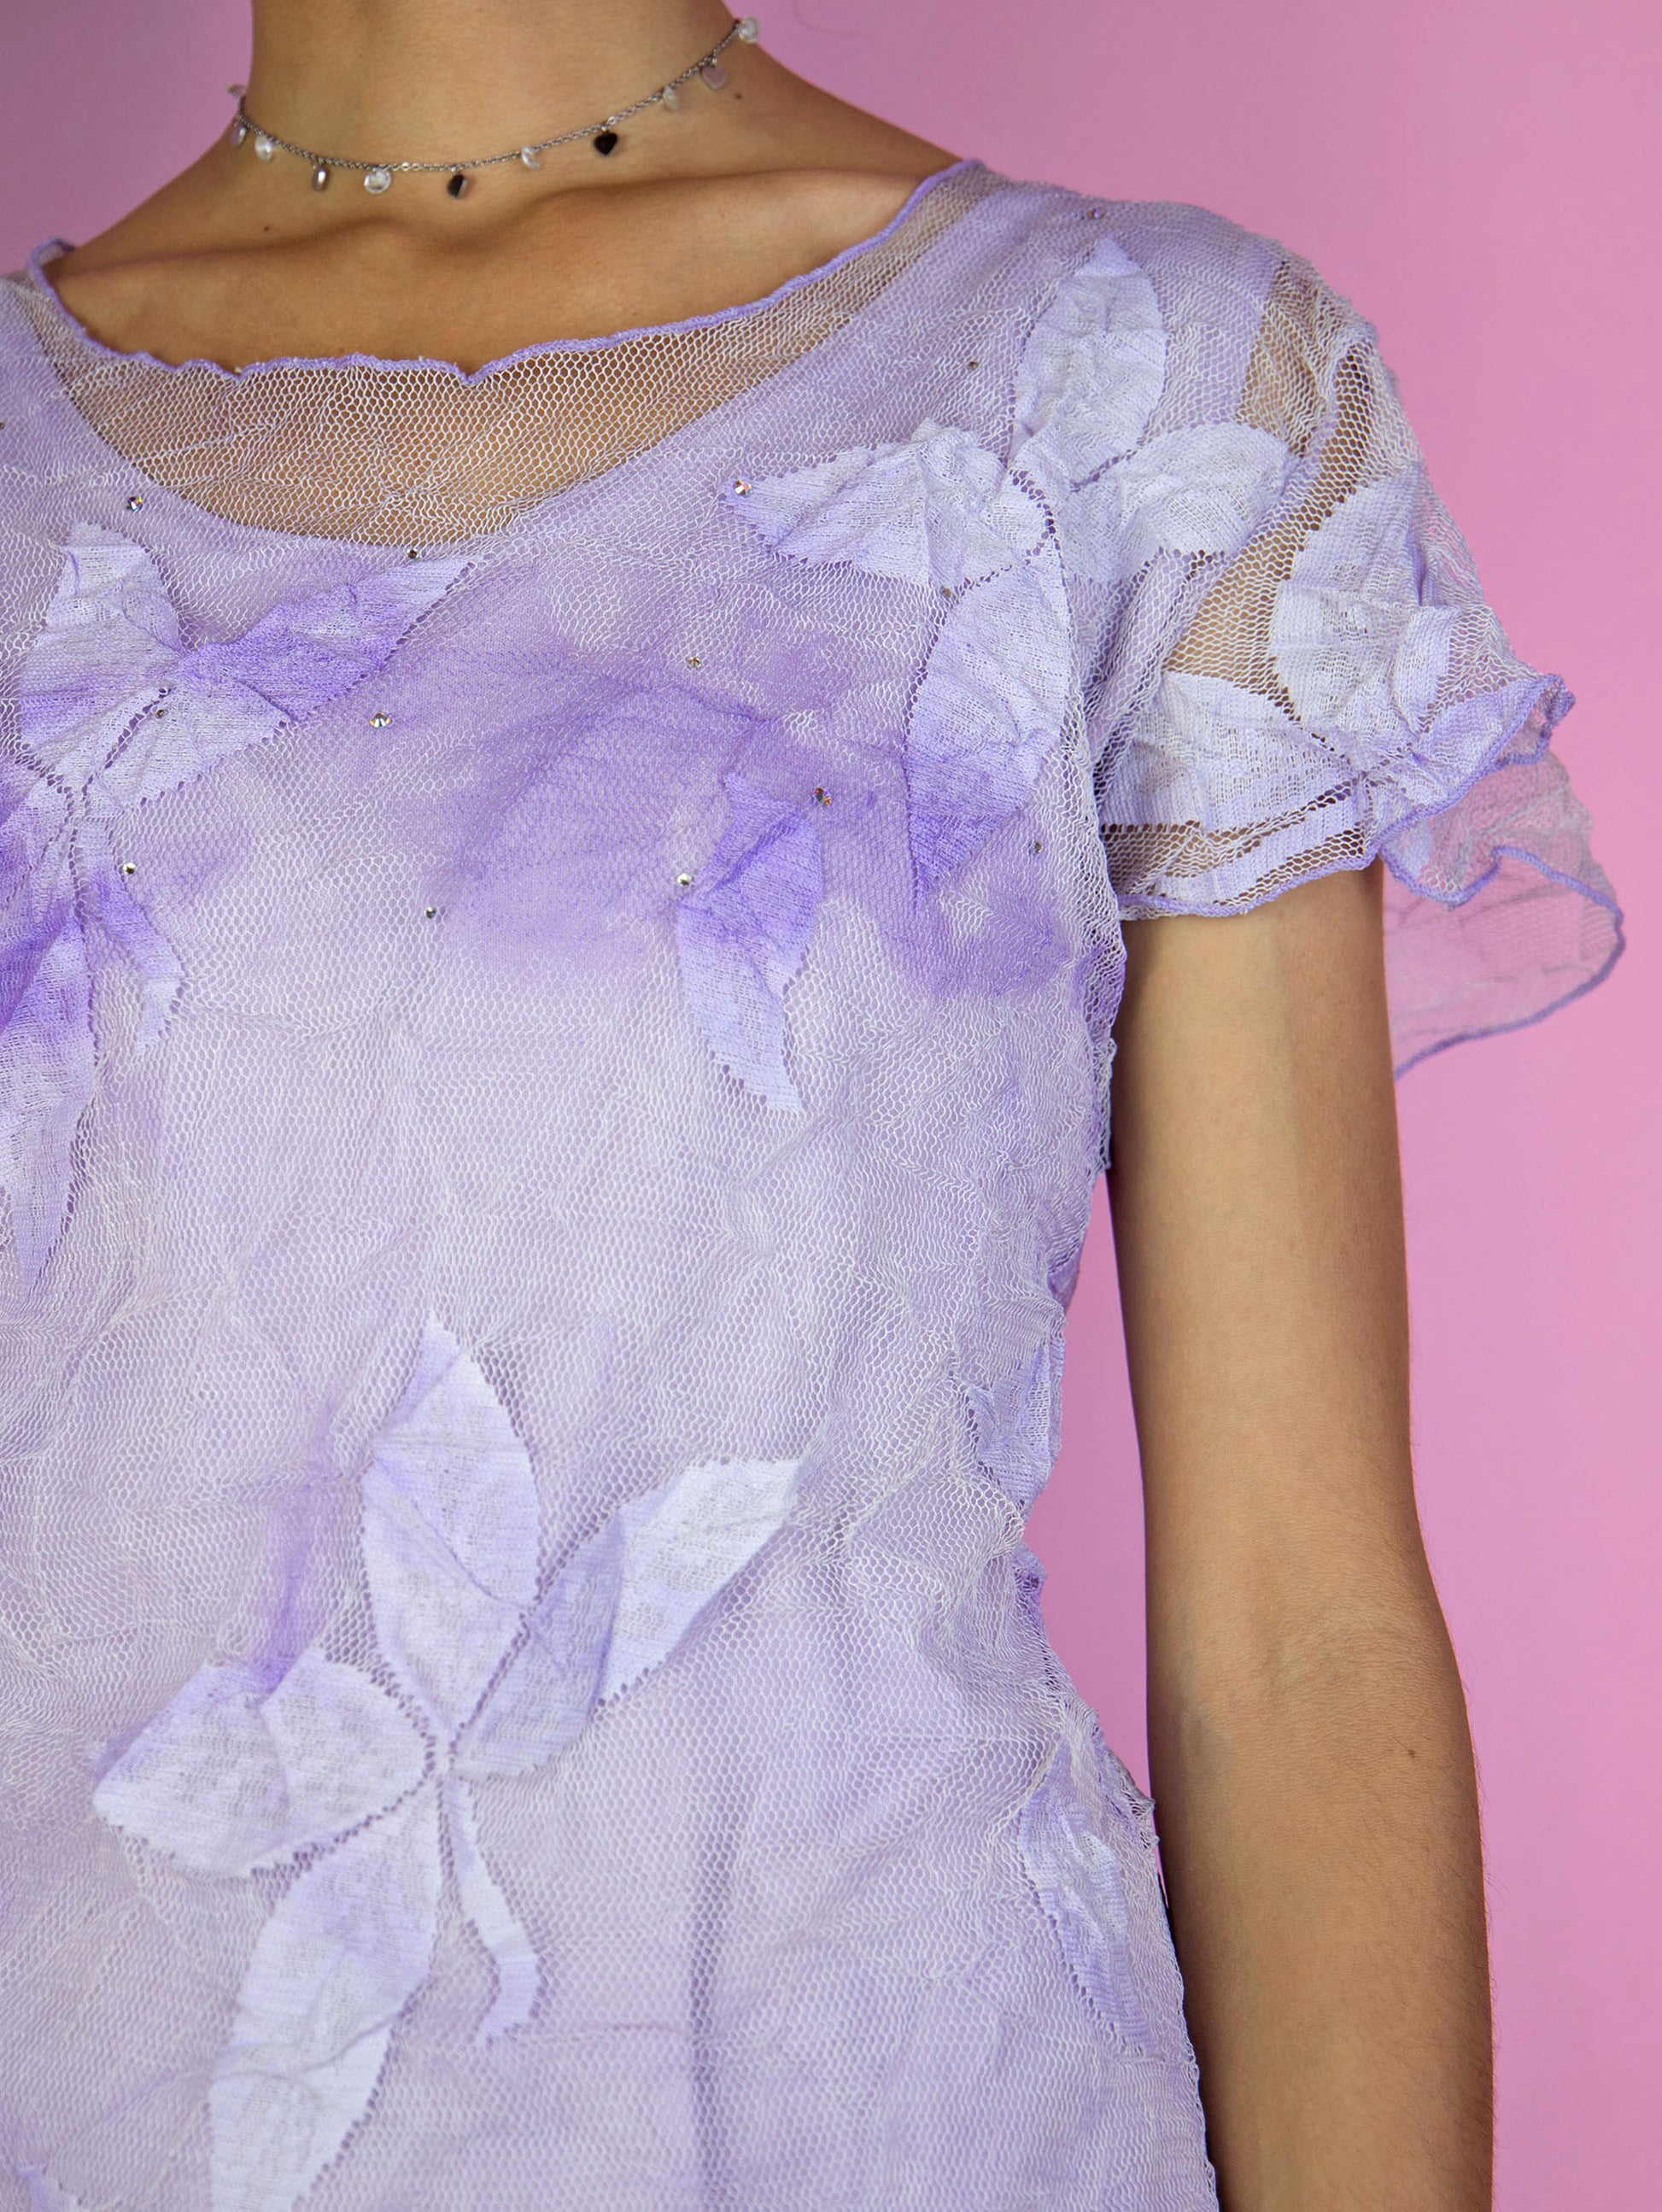 The Y2K Lilac Mesh Sheer Top is a vintage short-sleeve, pastel purple semi-sheer mesh top adorned with delicate floral tulle and rhinestones. Romantic coquette 2000s fairy grunge shirt.